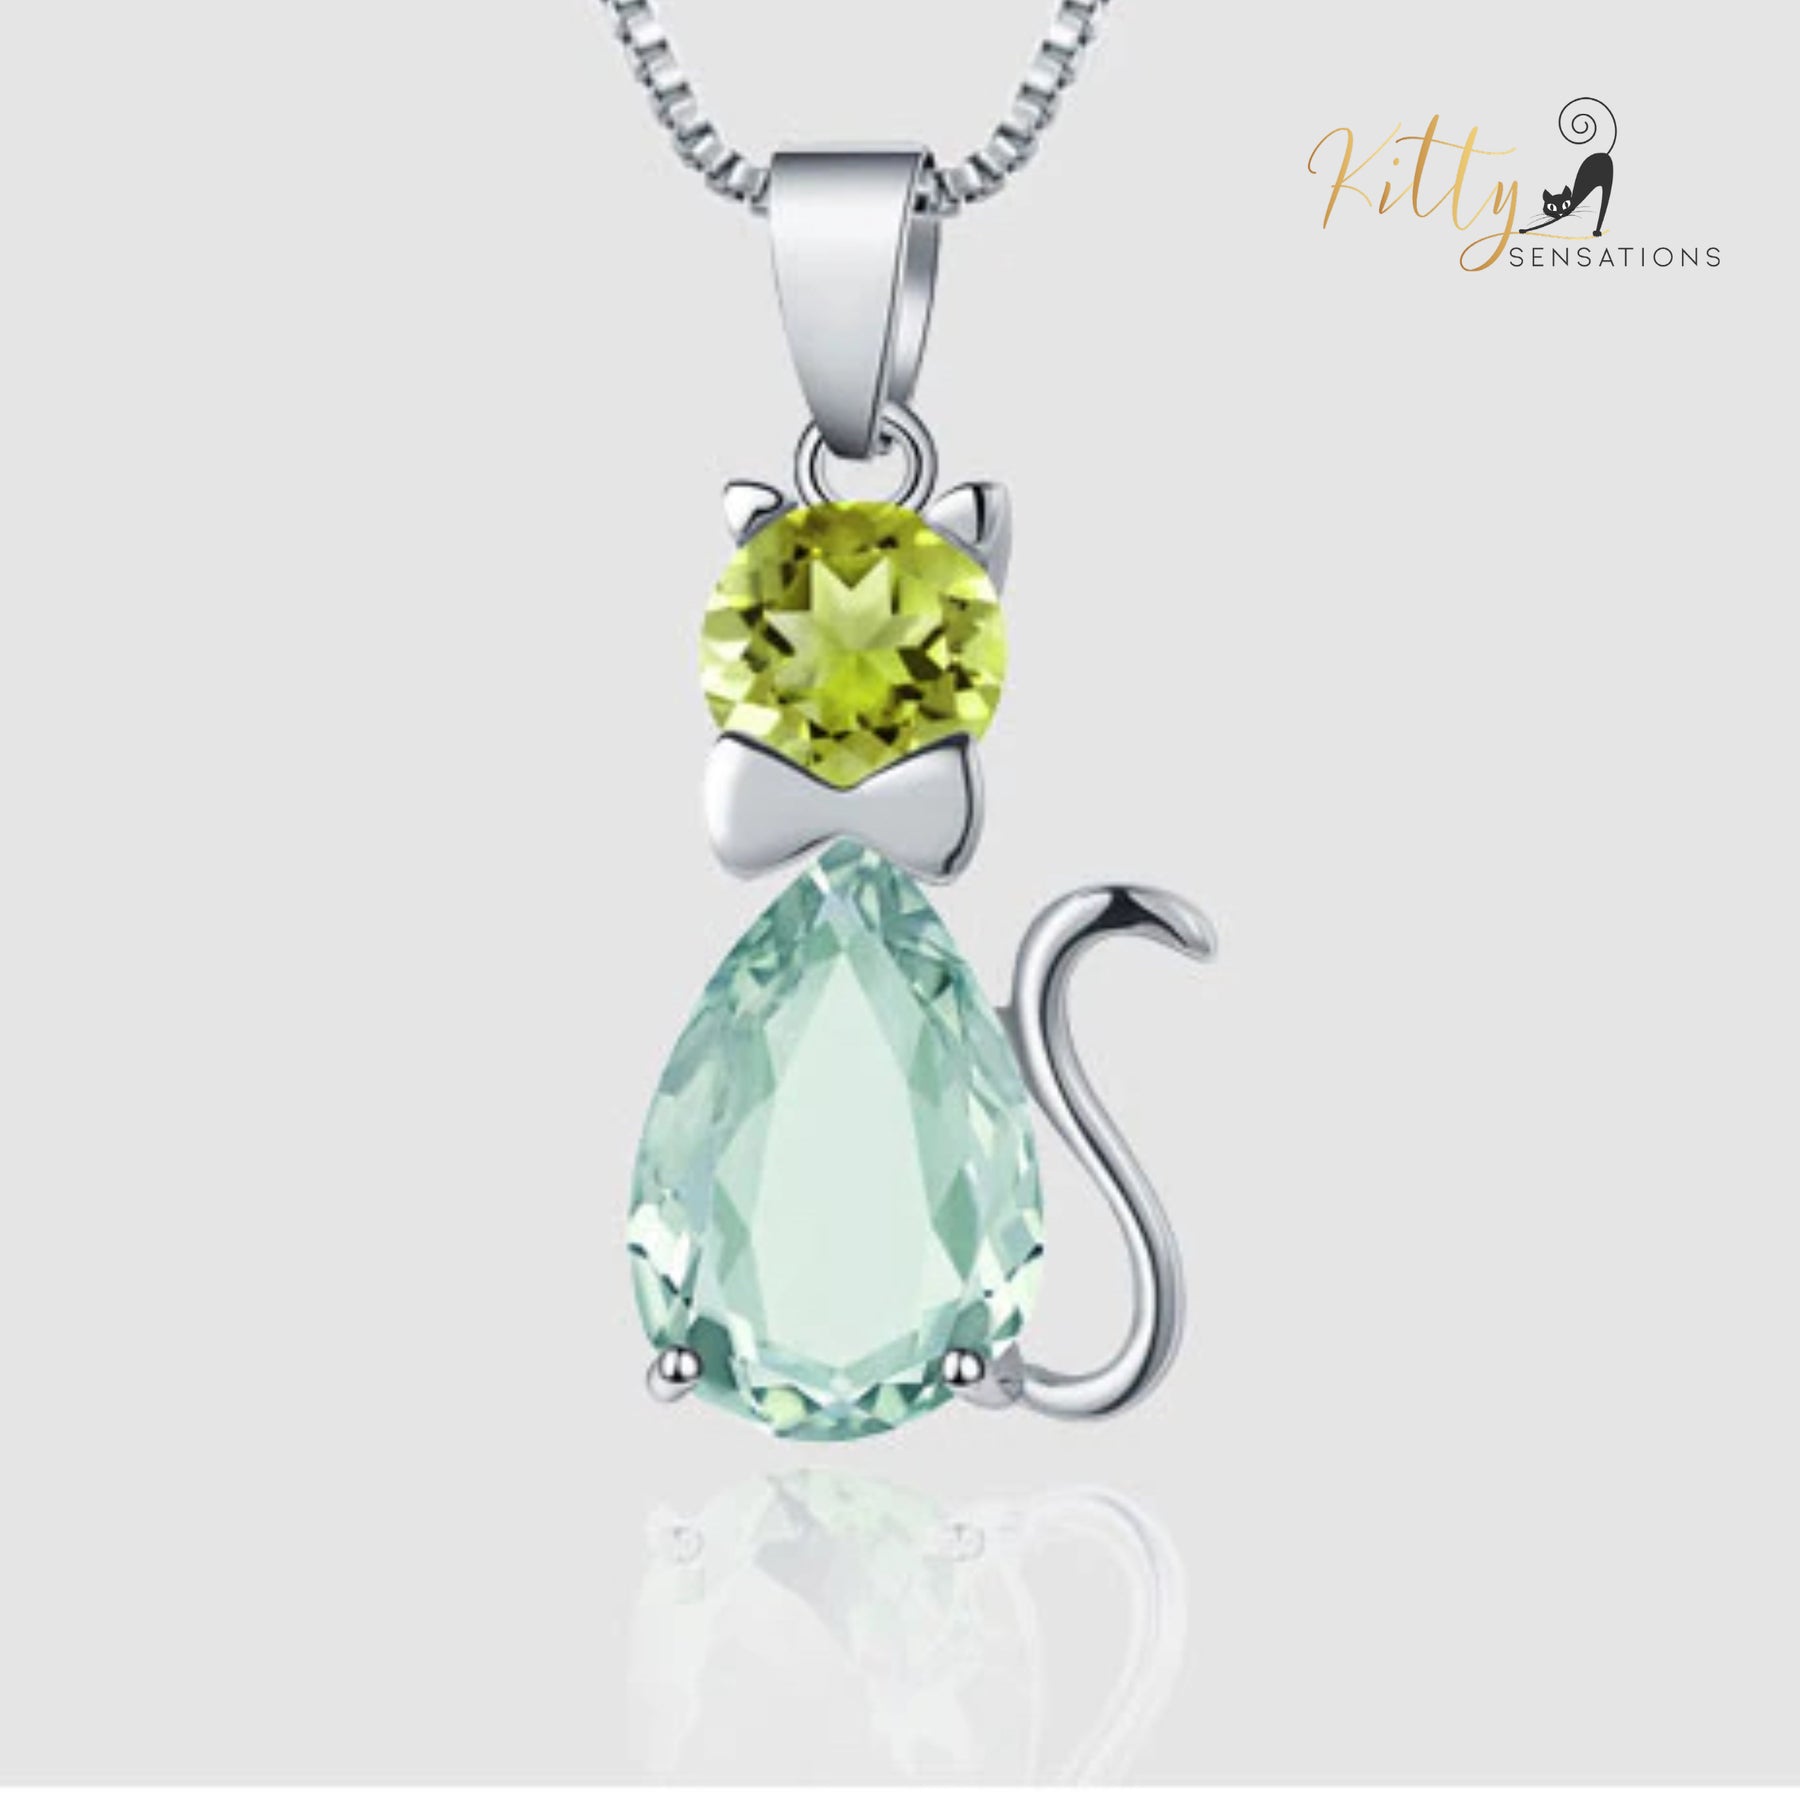 www.KittySensations.com: Natural Green Amethyst Cat Necklace in Solid 925 Sterling Silver ($194): https://www.kittysensations.com/products/natural-green-amethyst-cat-necklace-in-solid-925-sterling-silver